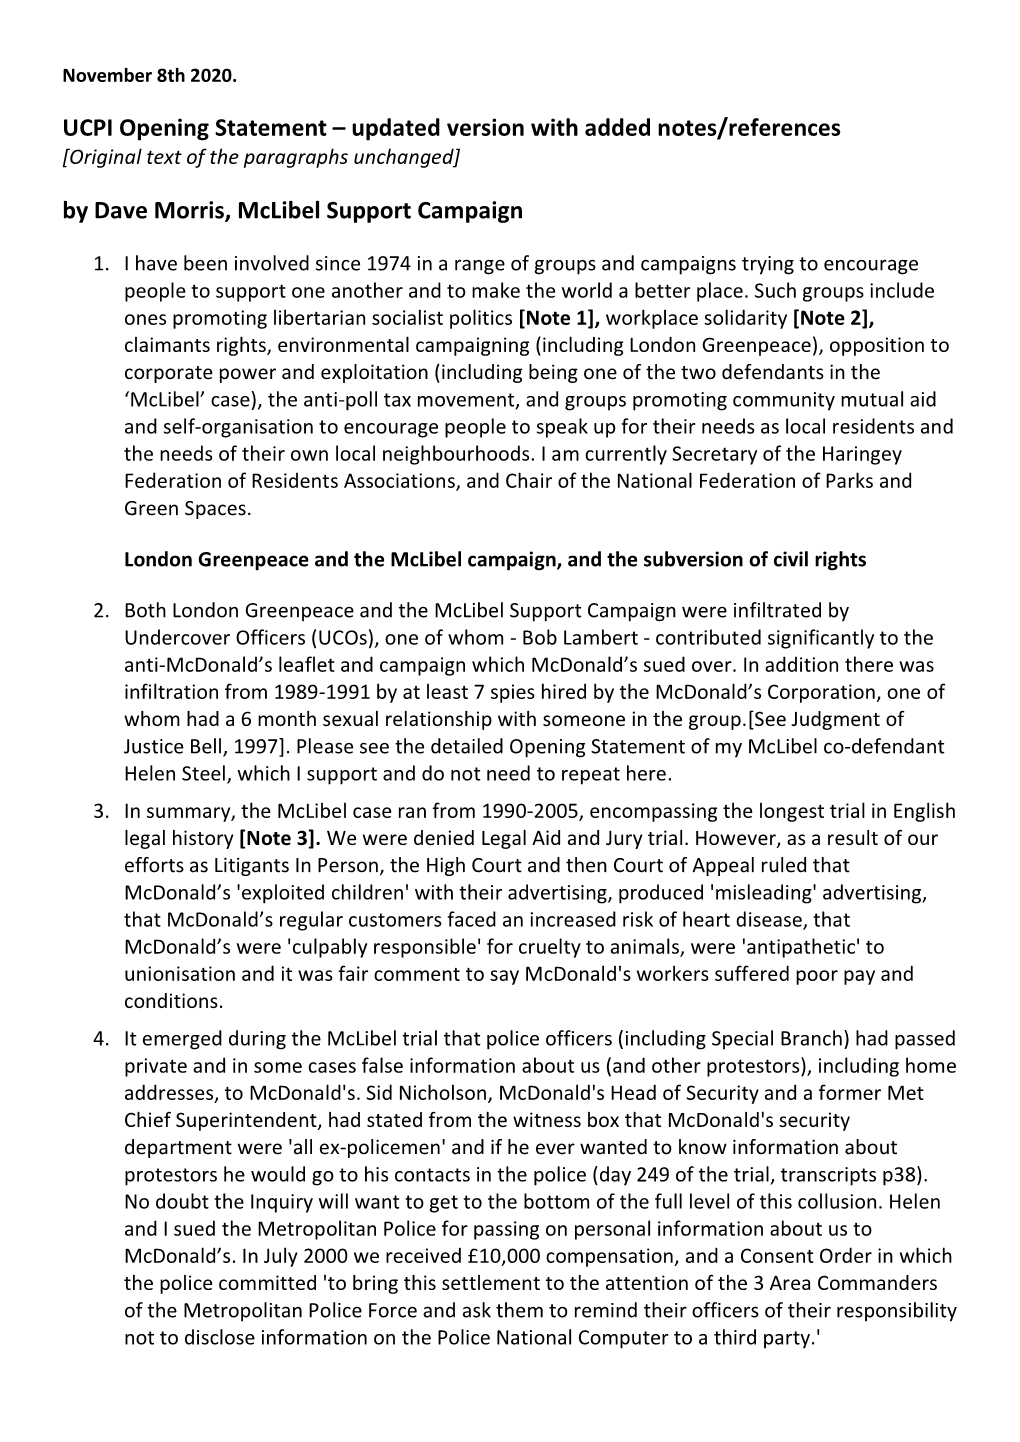 UCPI Opening Statement – Updated Version with Added Notes/References [Original Text of the Paragraphs Unchanged] by Dave Morris, Mclibel Support Campaign